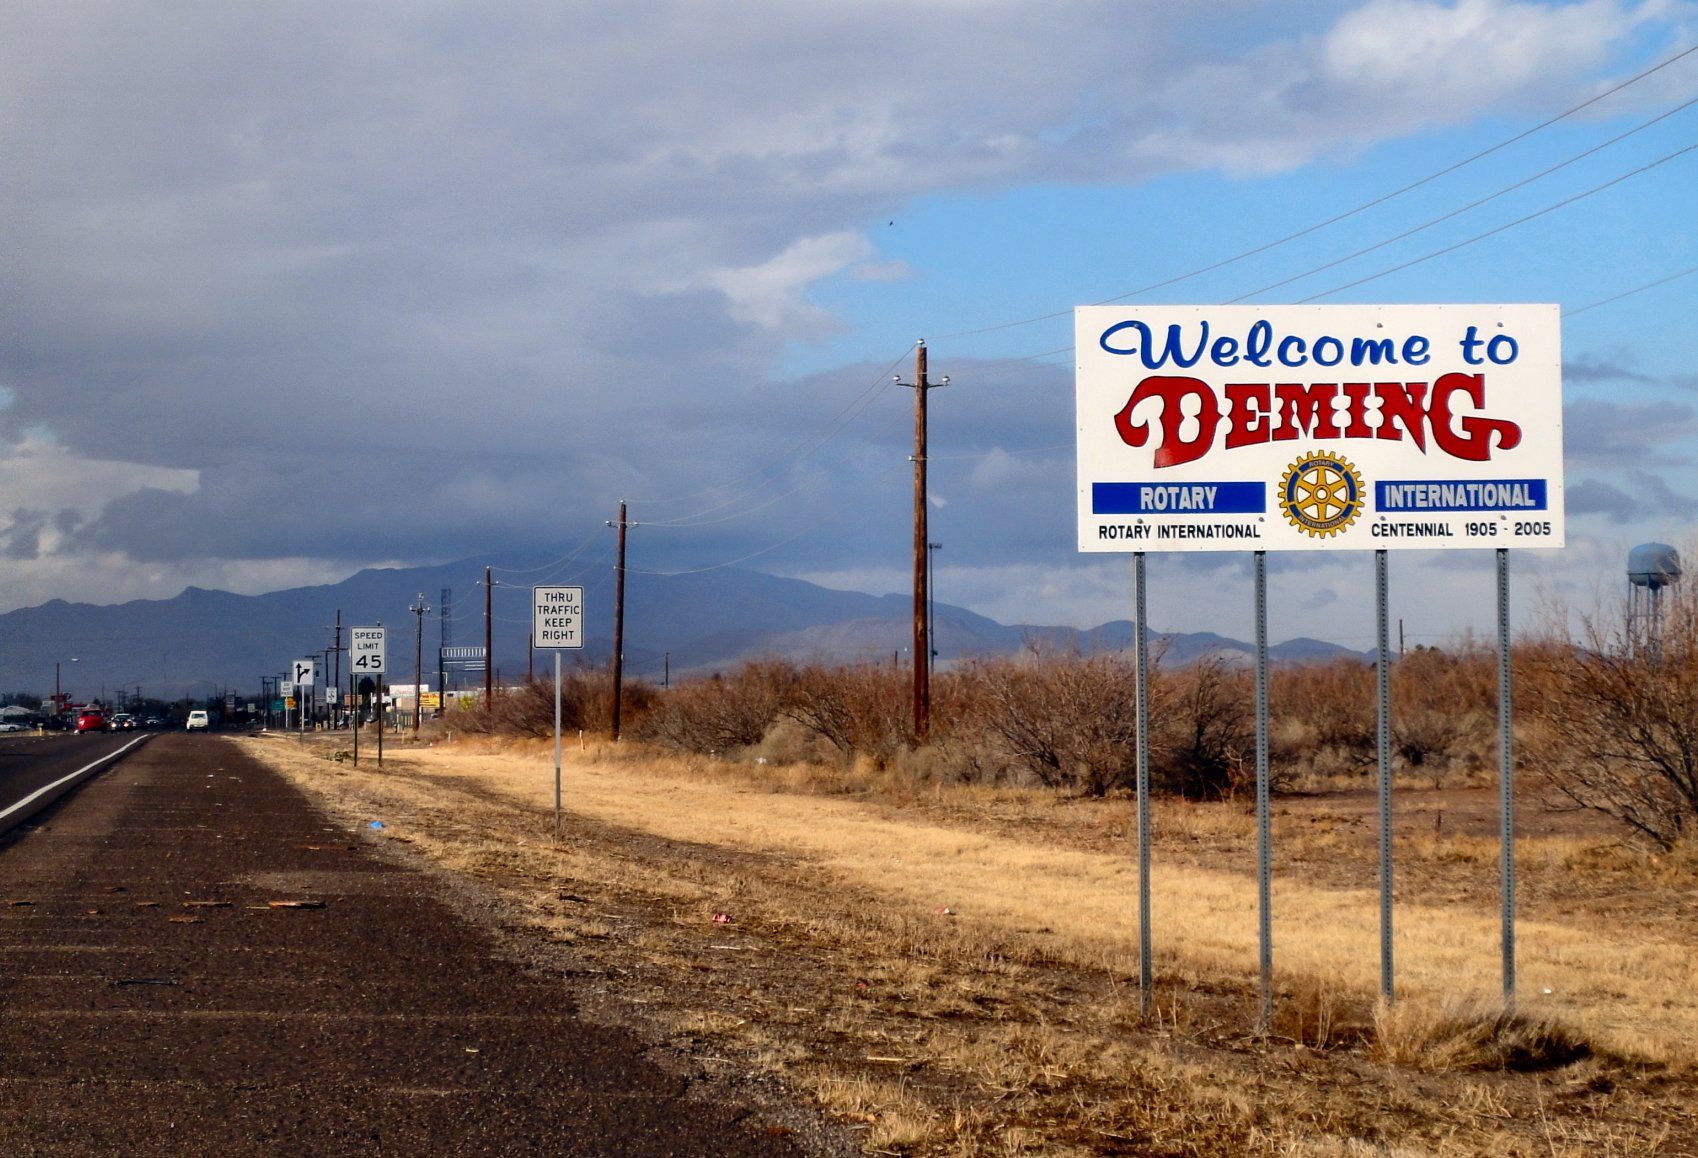 Deming, New Mexico